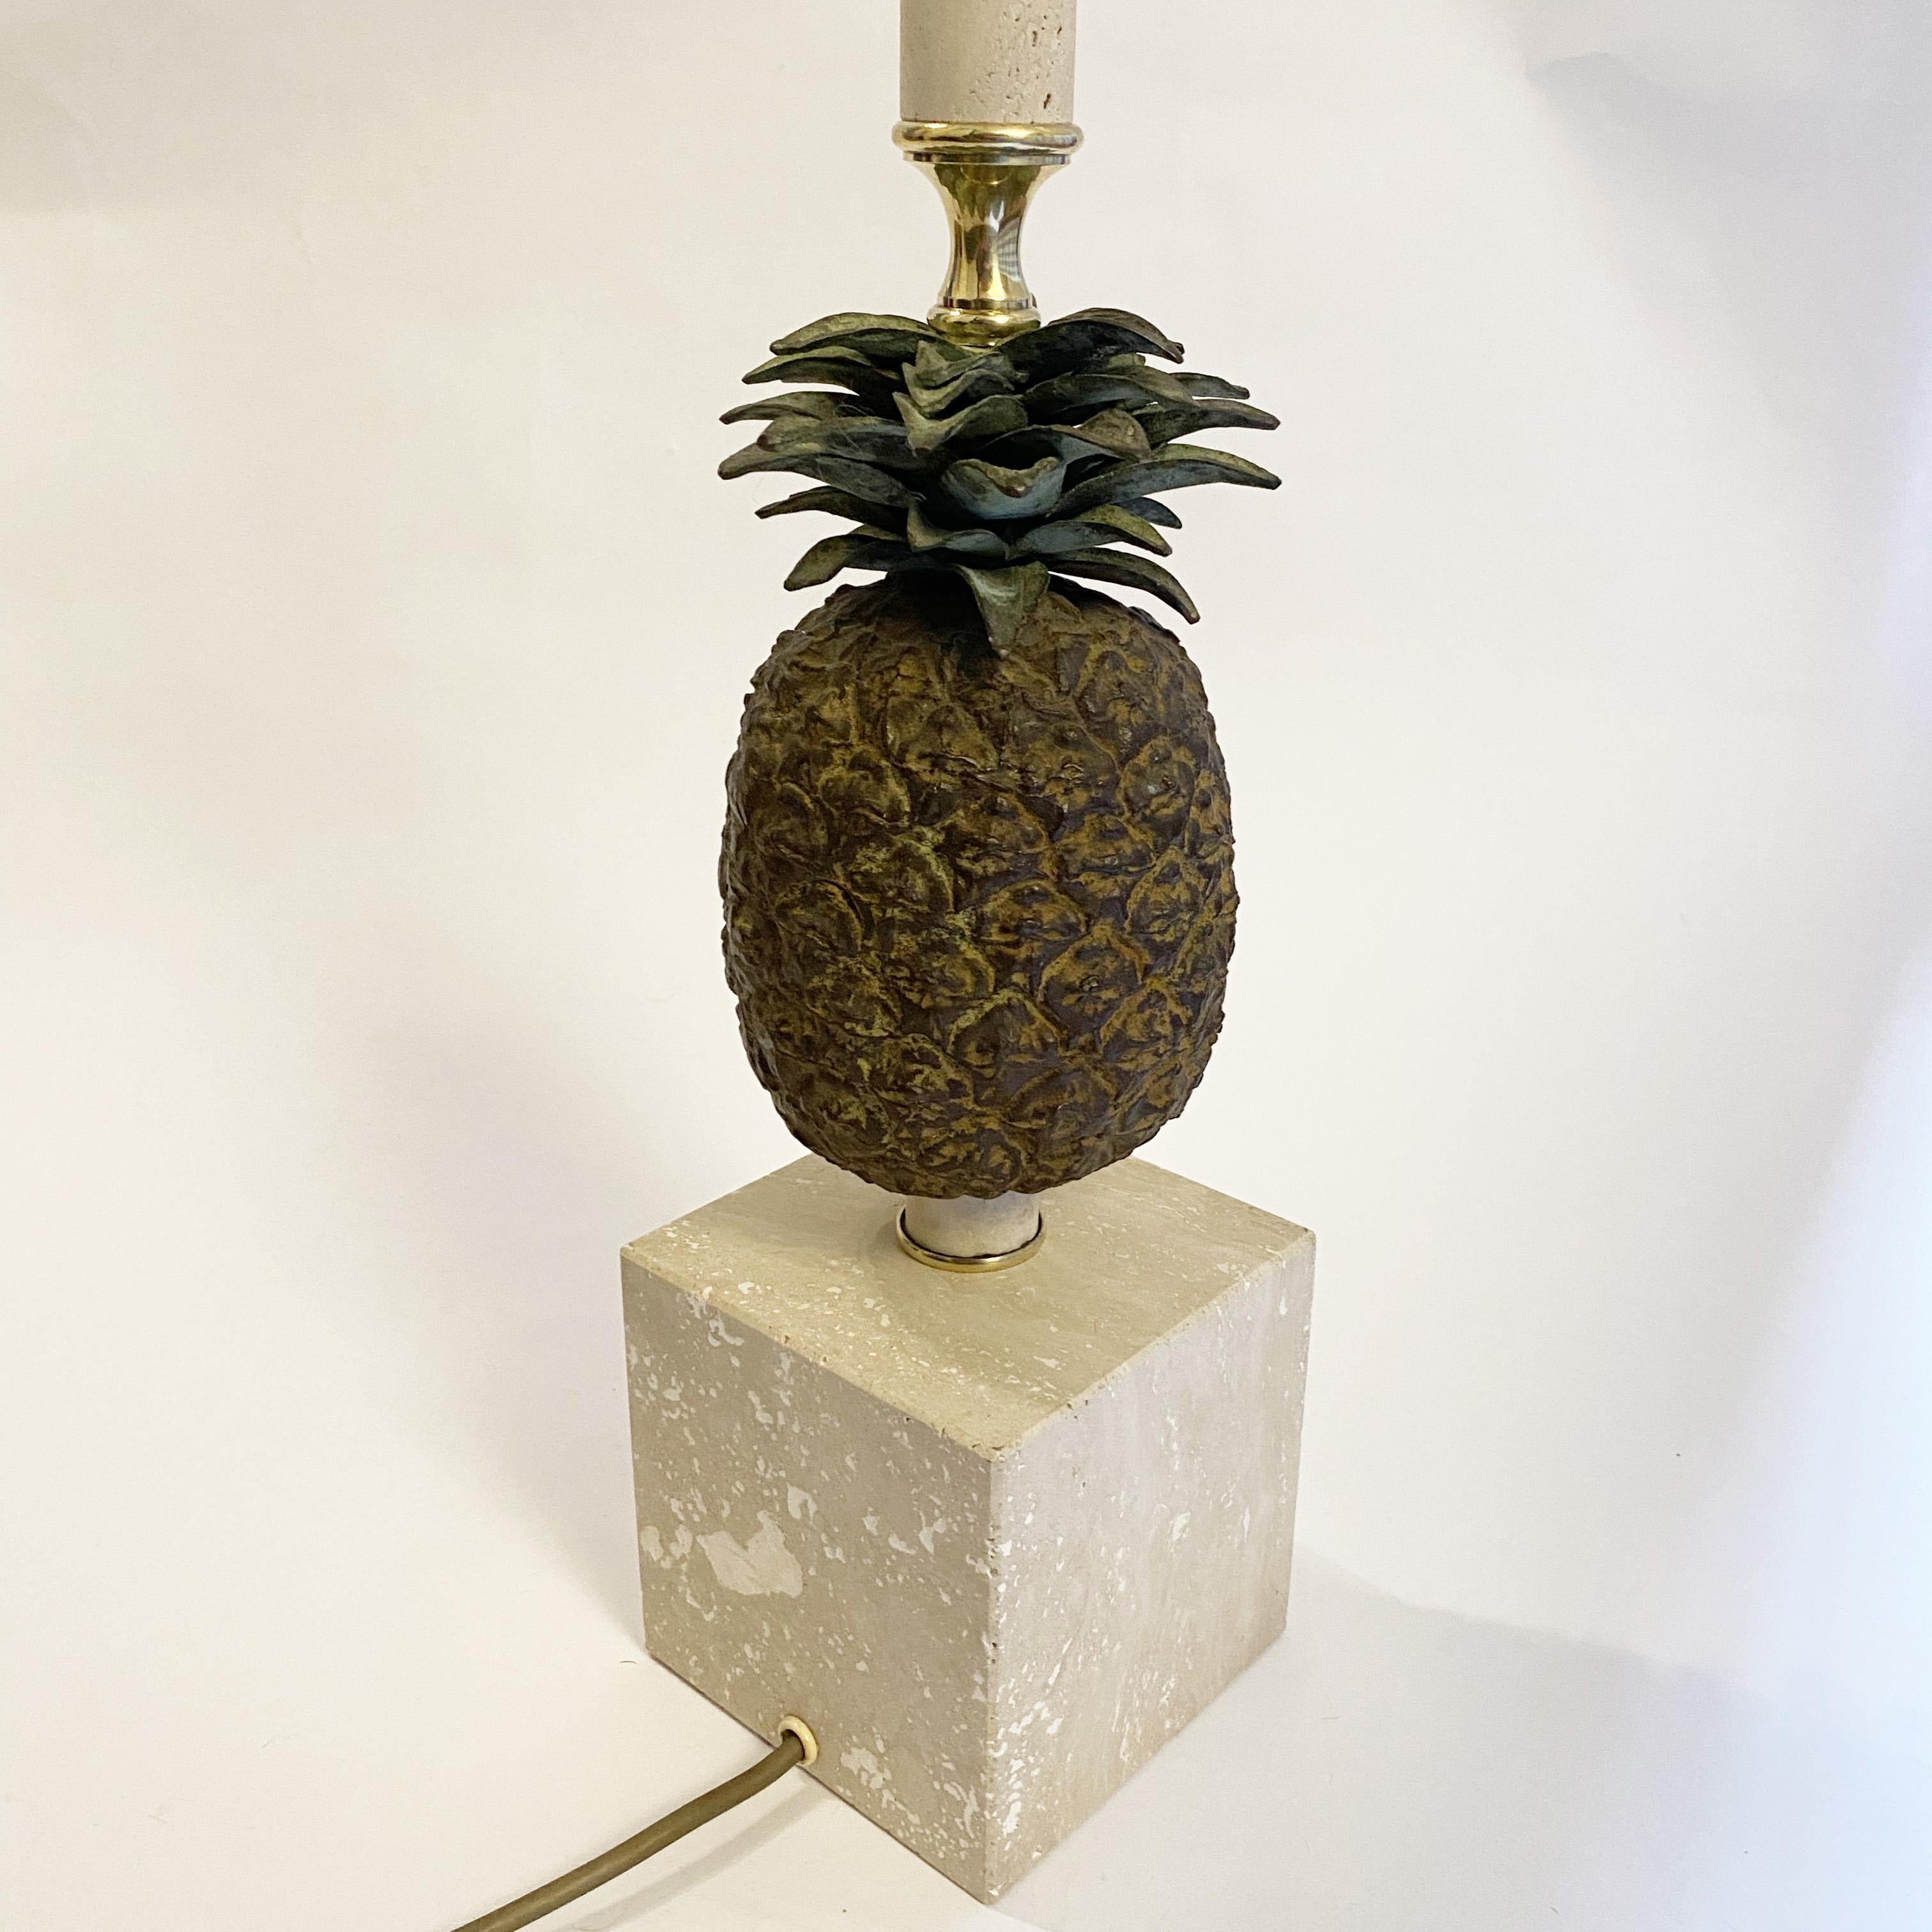 Hollywood Regency Pineapple Table Lamp in Patined Bronze and Travertine, 1970s For Sale 2